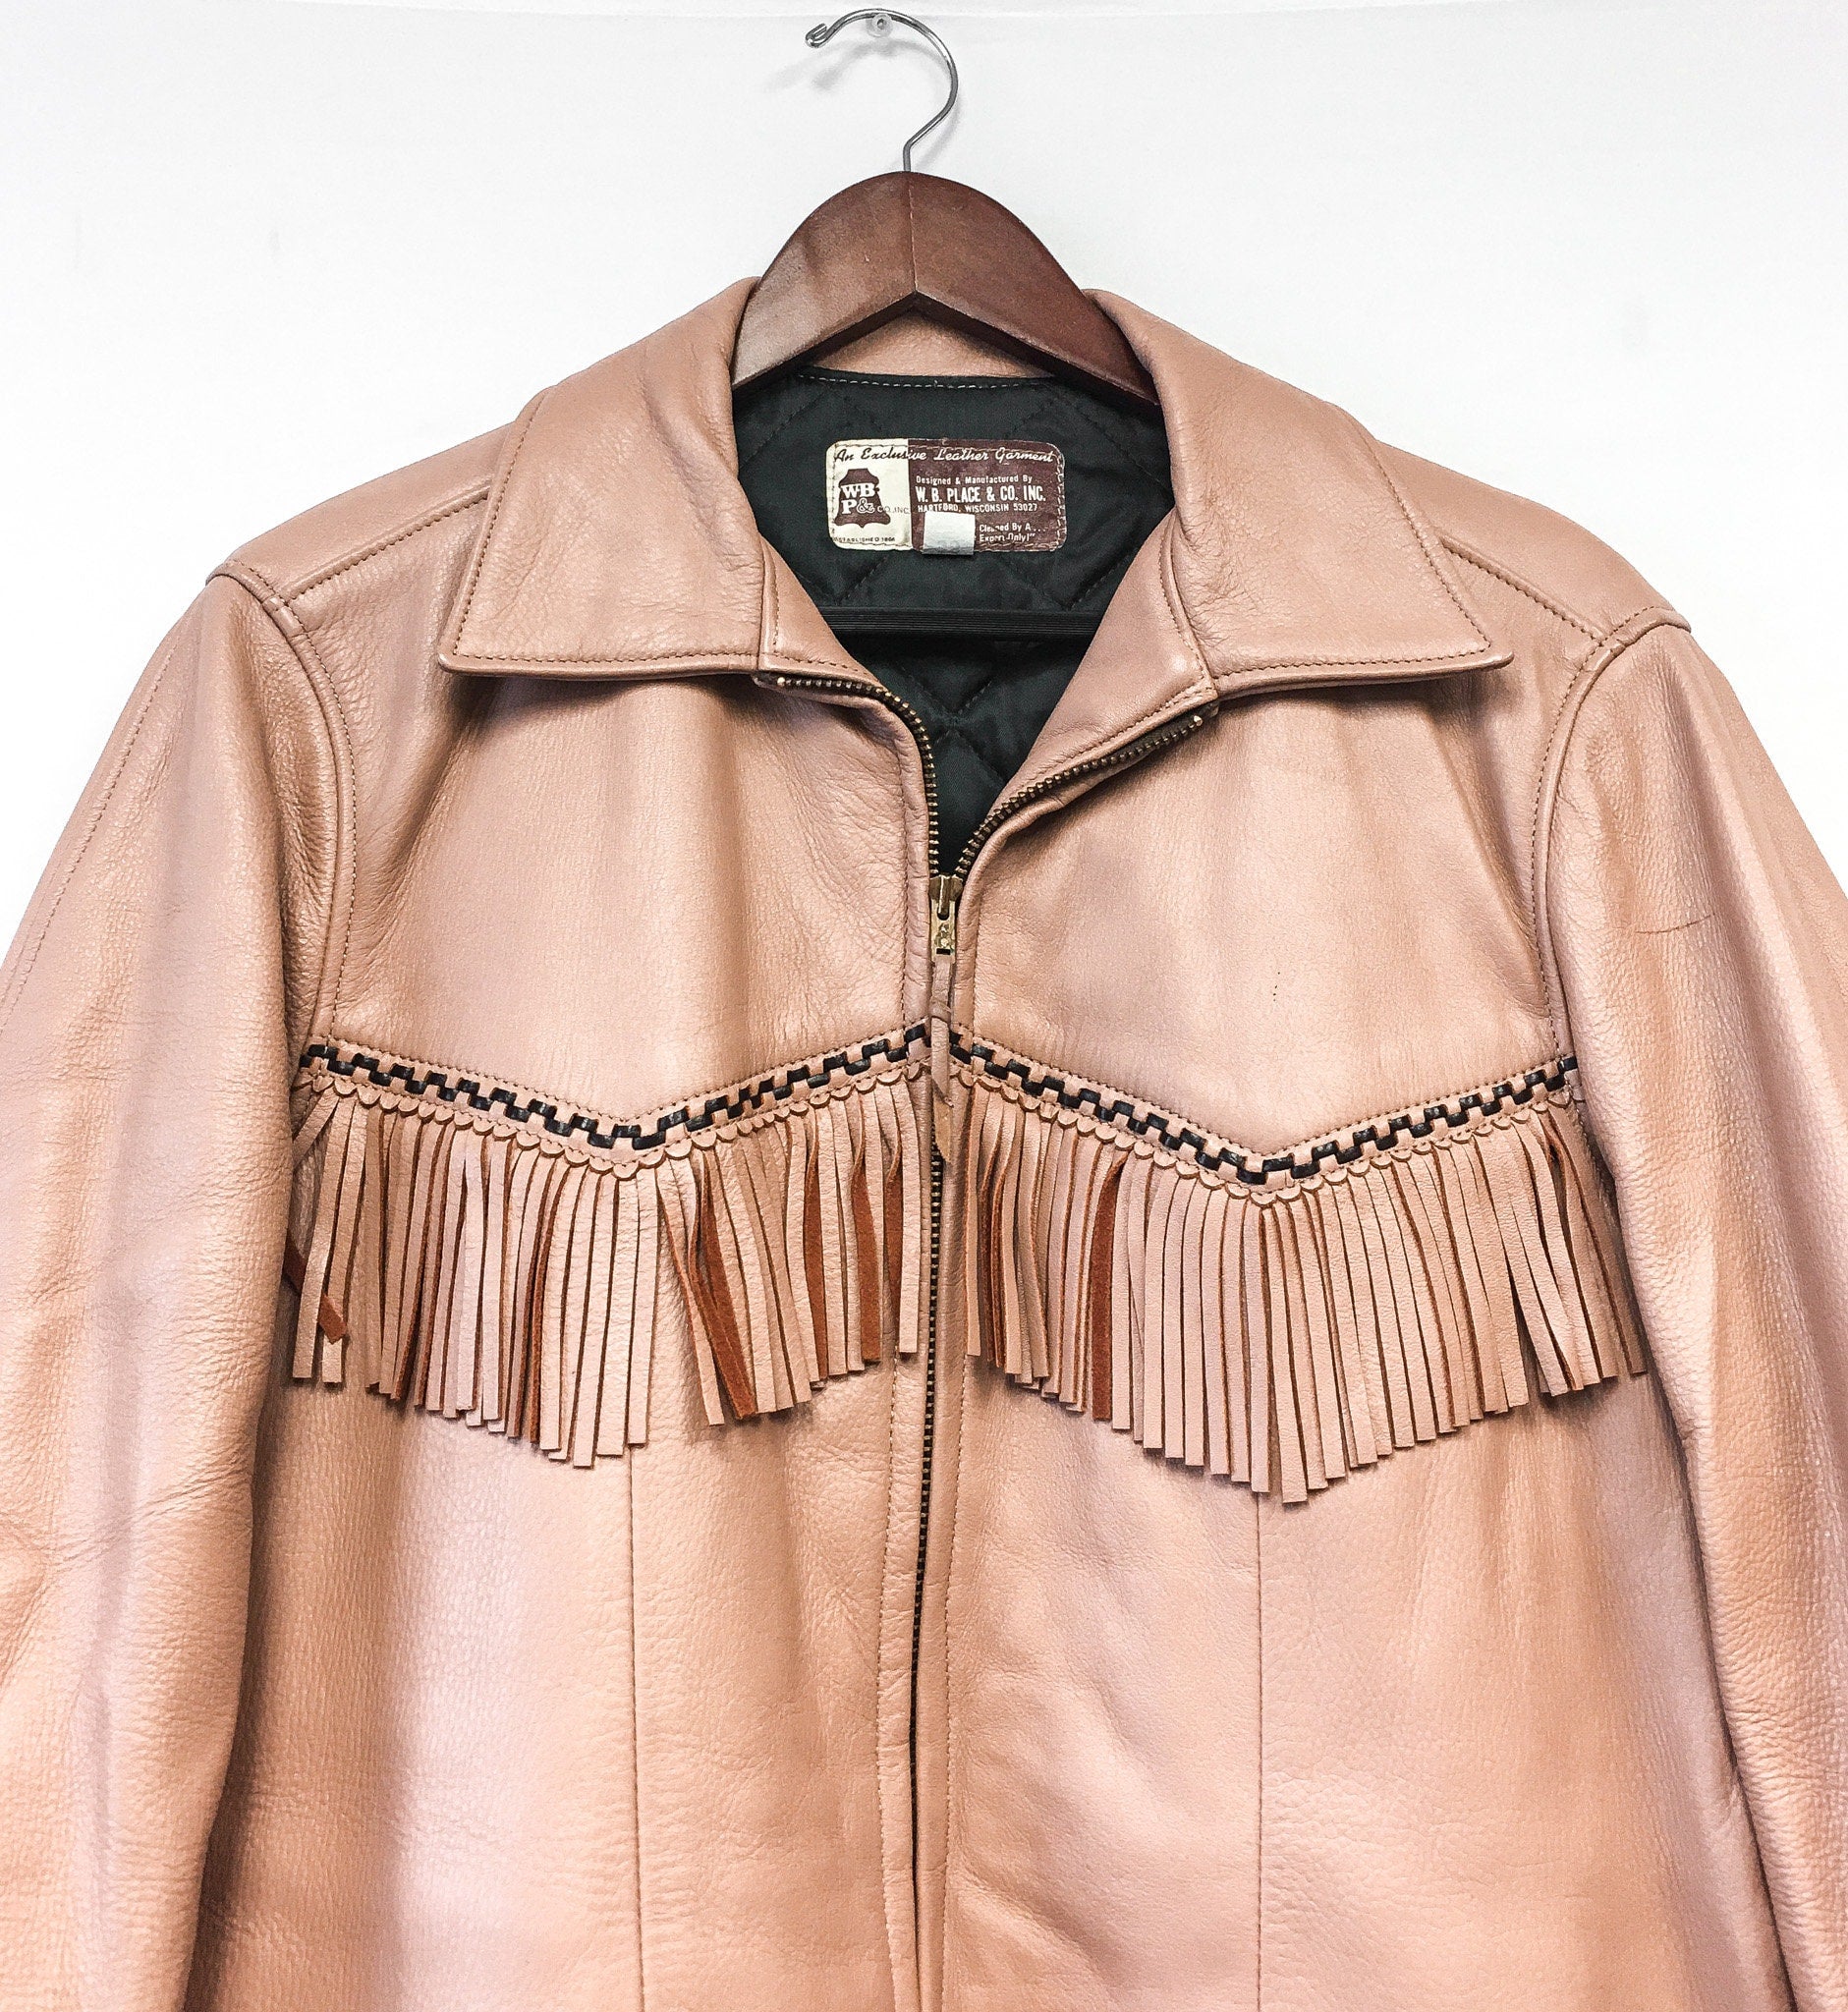 Vintage 50s/60s W. B. Place and Co. Salmon Pink Fringe Leather Jacket, Sz. 38